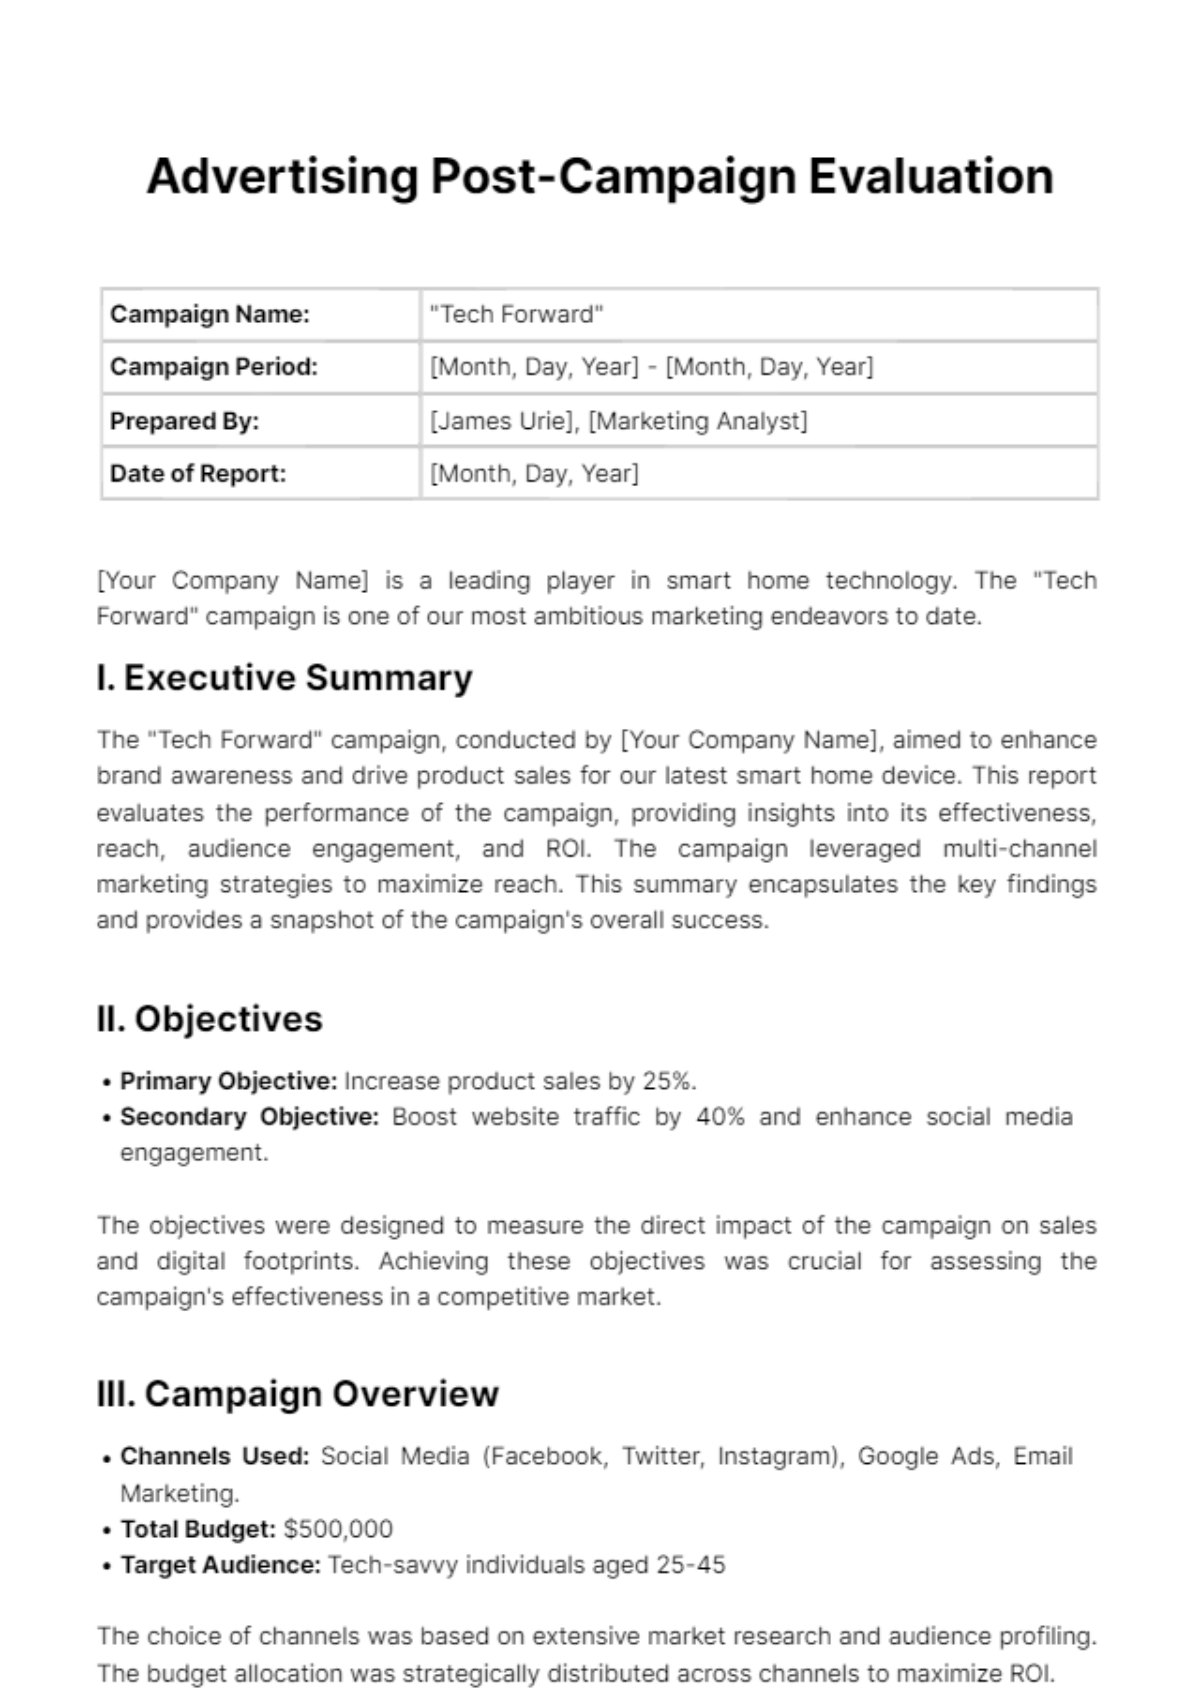 Advertising Post-Campaign Evaluation Template